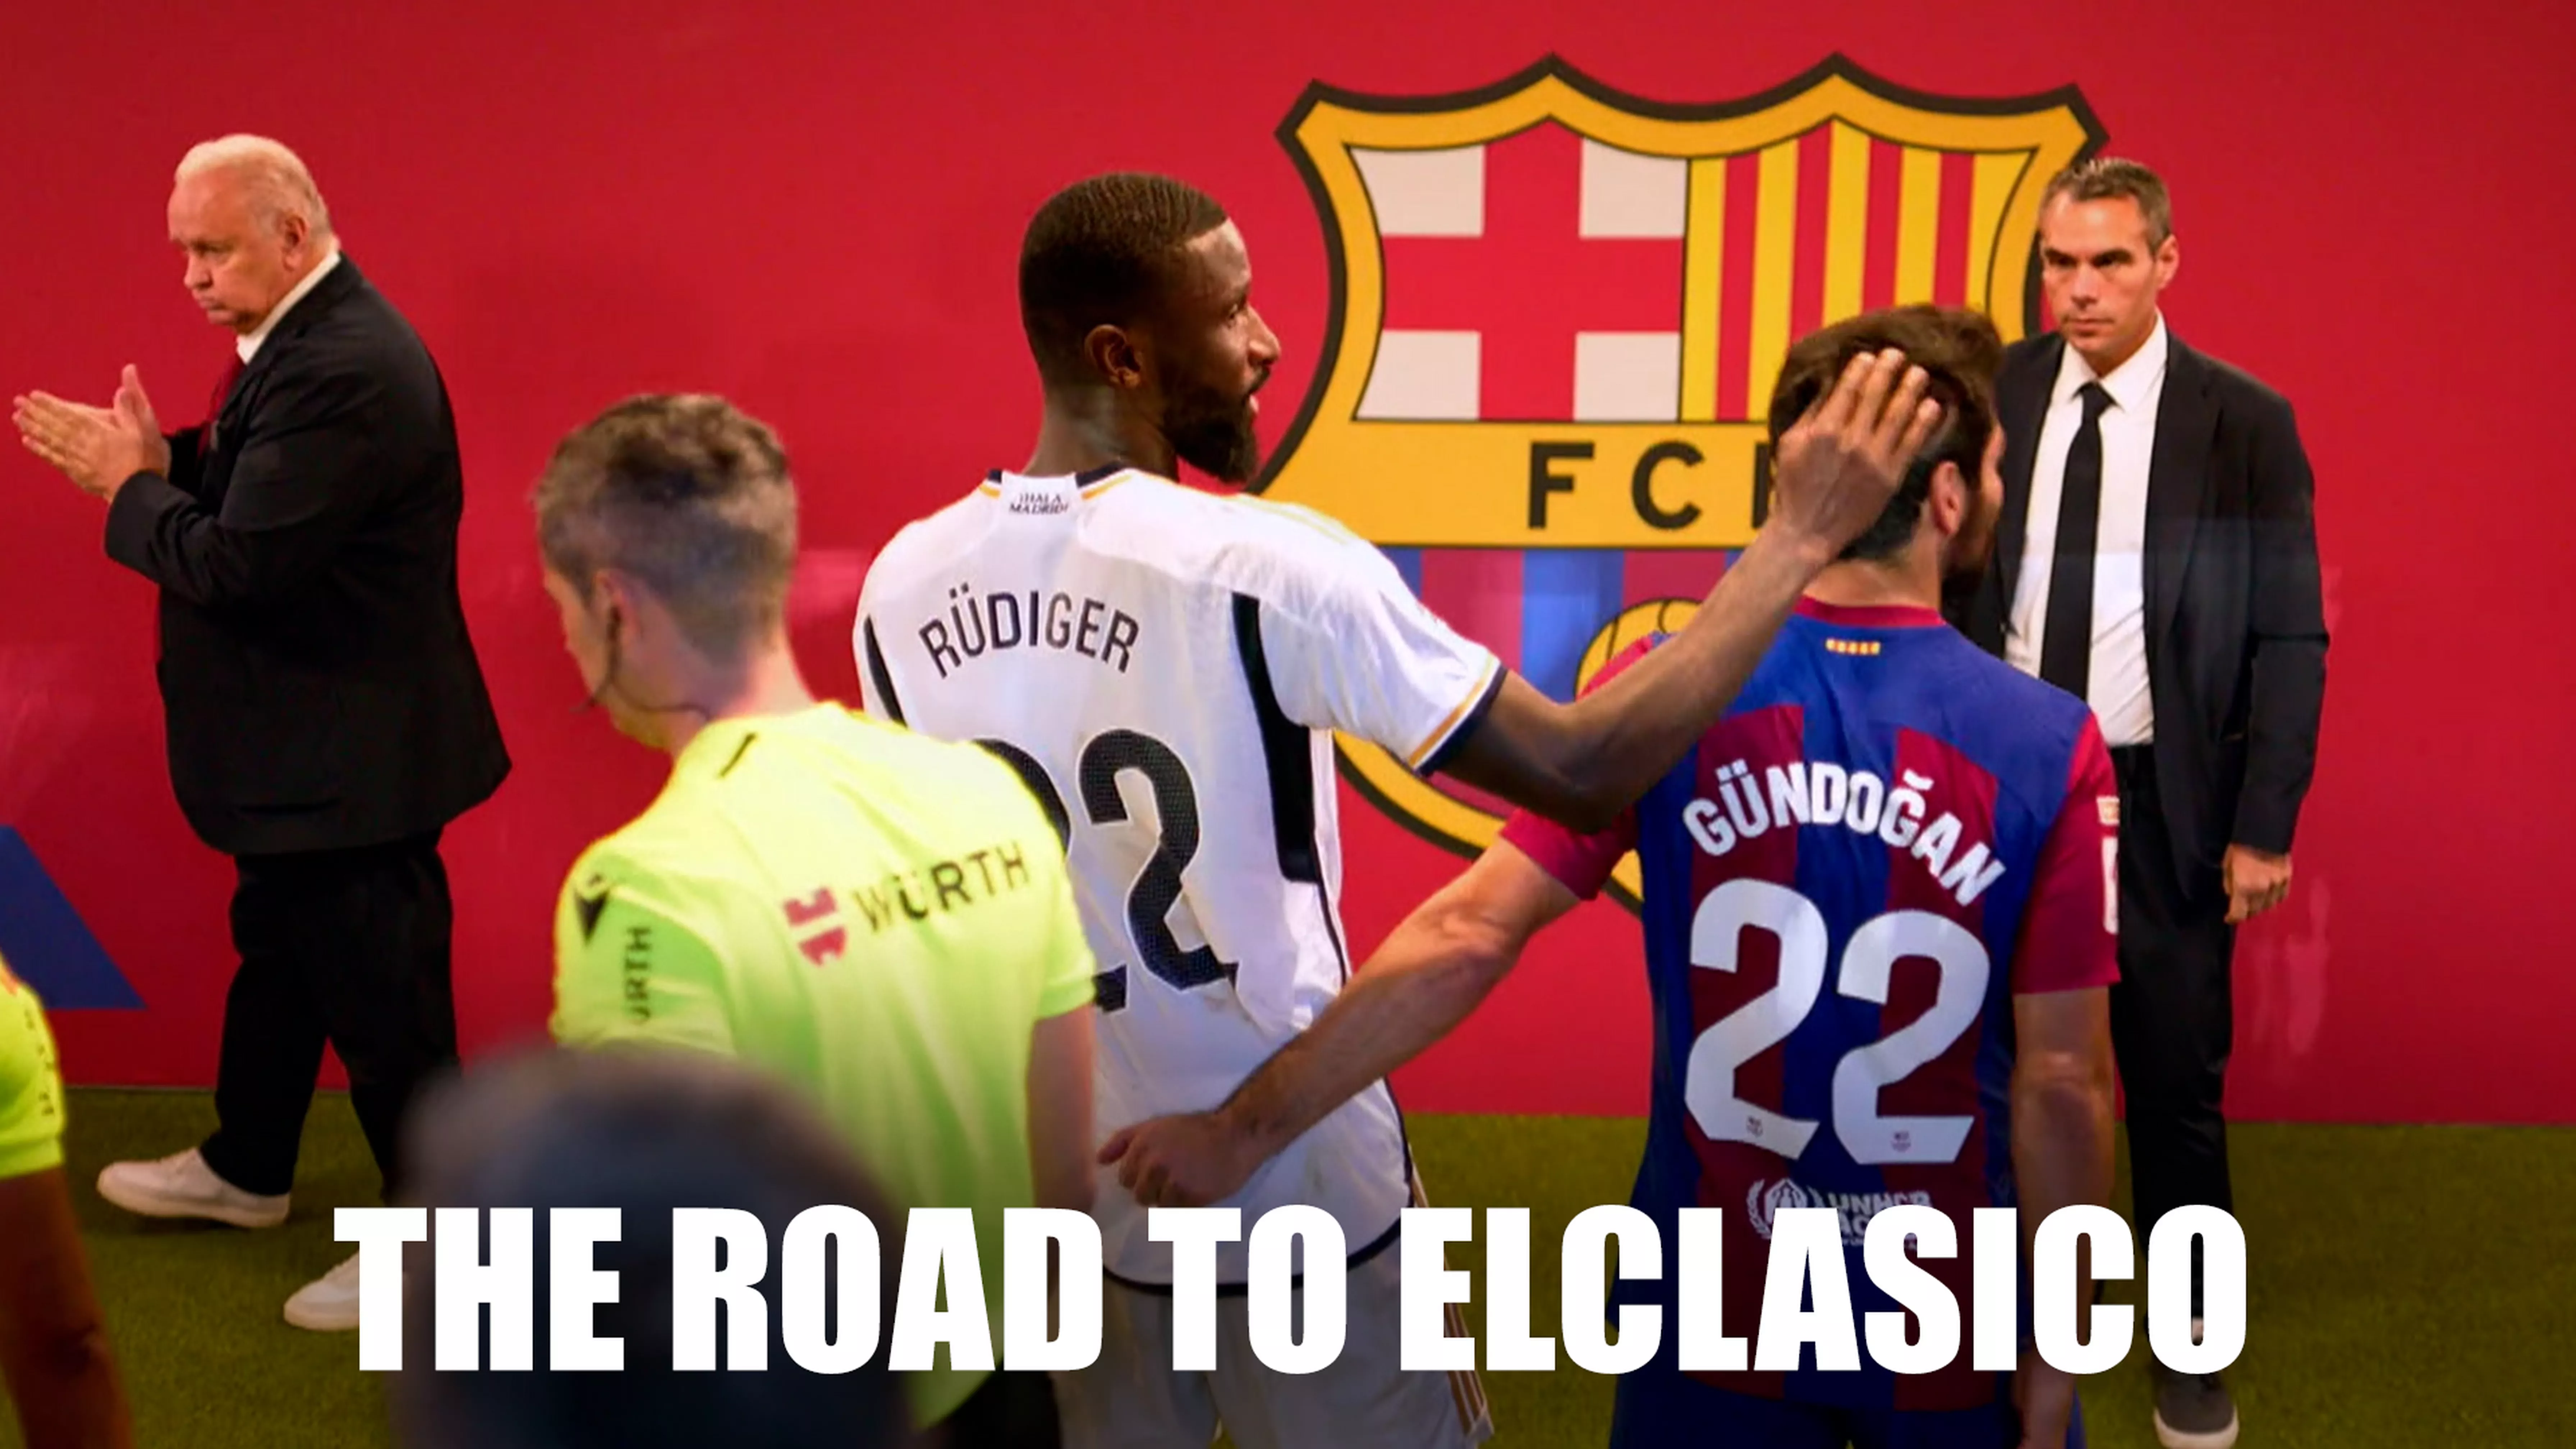 THE ROAD TO ELCLASICO